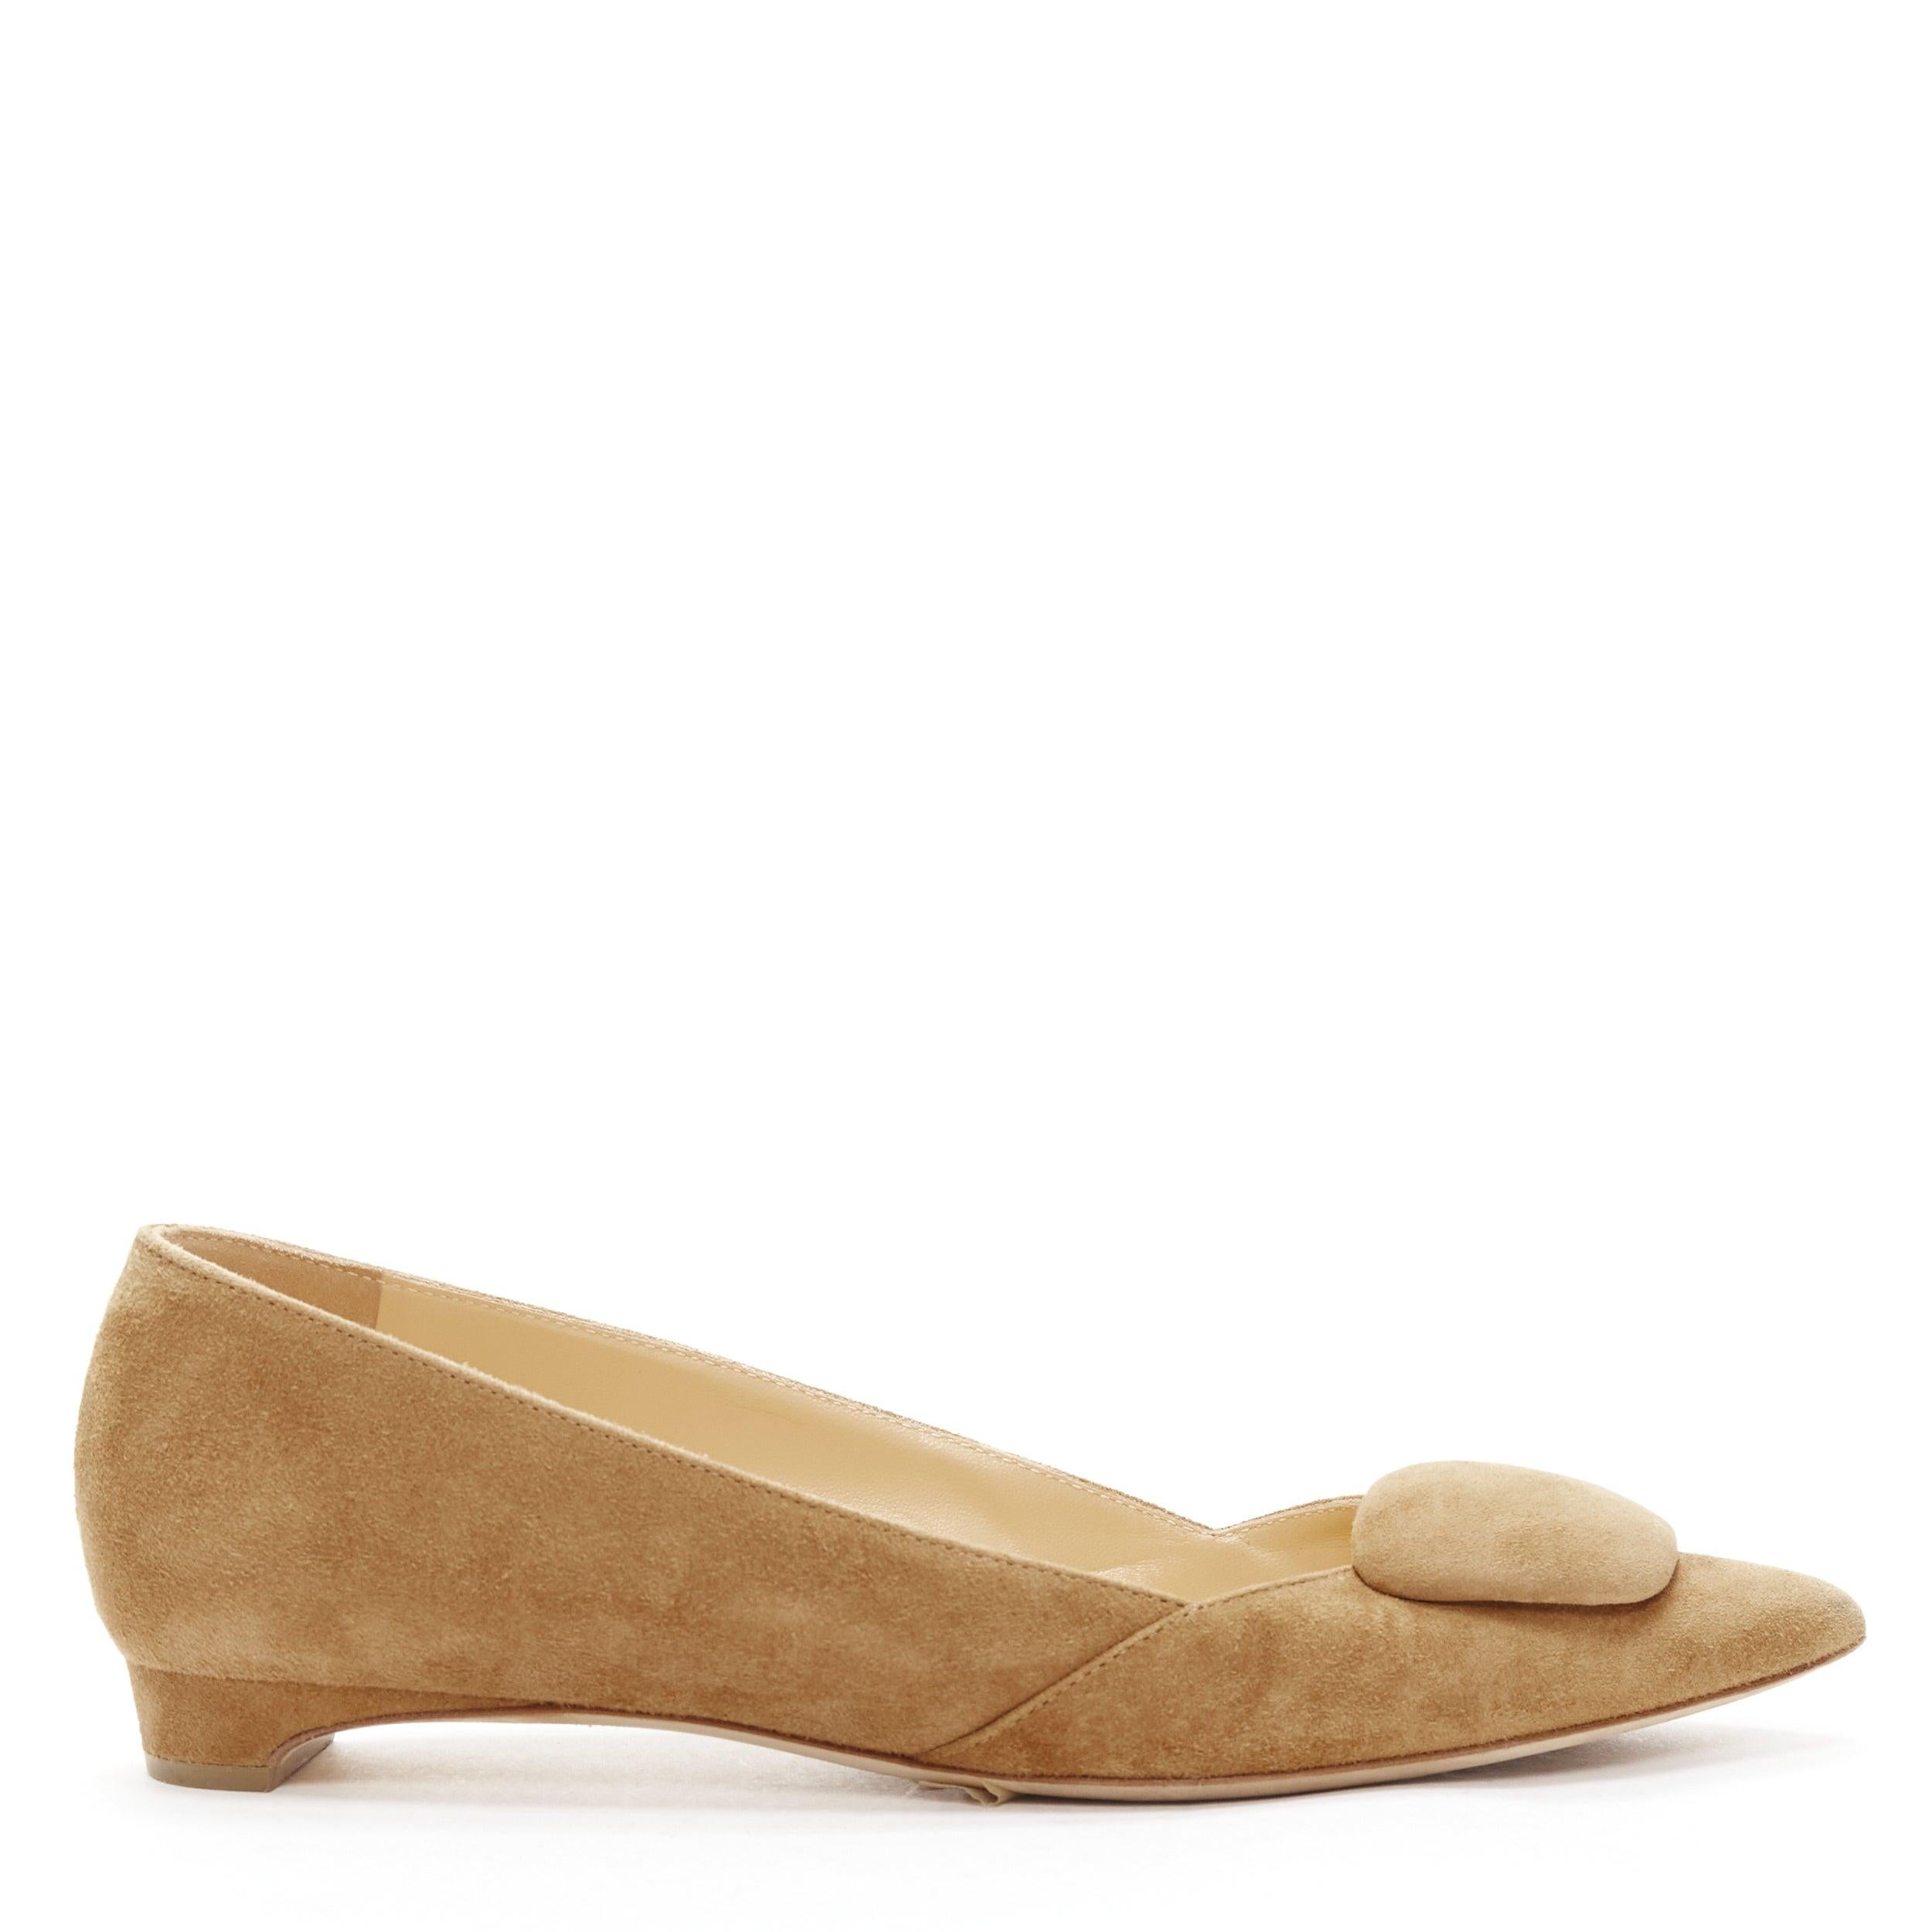 RUPERT SANDERSON Aga 10 sand suede square bukle flats EU37.5
Reference: SNKO/A00375
Brand: Rupert Sanderson
Model: Aga 10
Material: Leather
Color: Brown
Pattern: Solid
Closure: Slip On
Lining: Nude Leather
Extra Details: Enduring classic flat